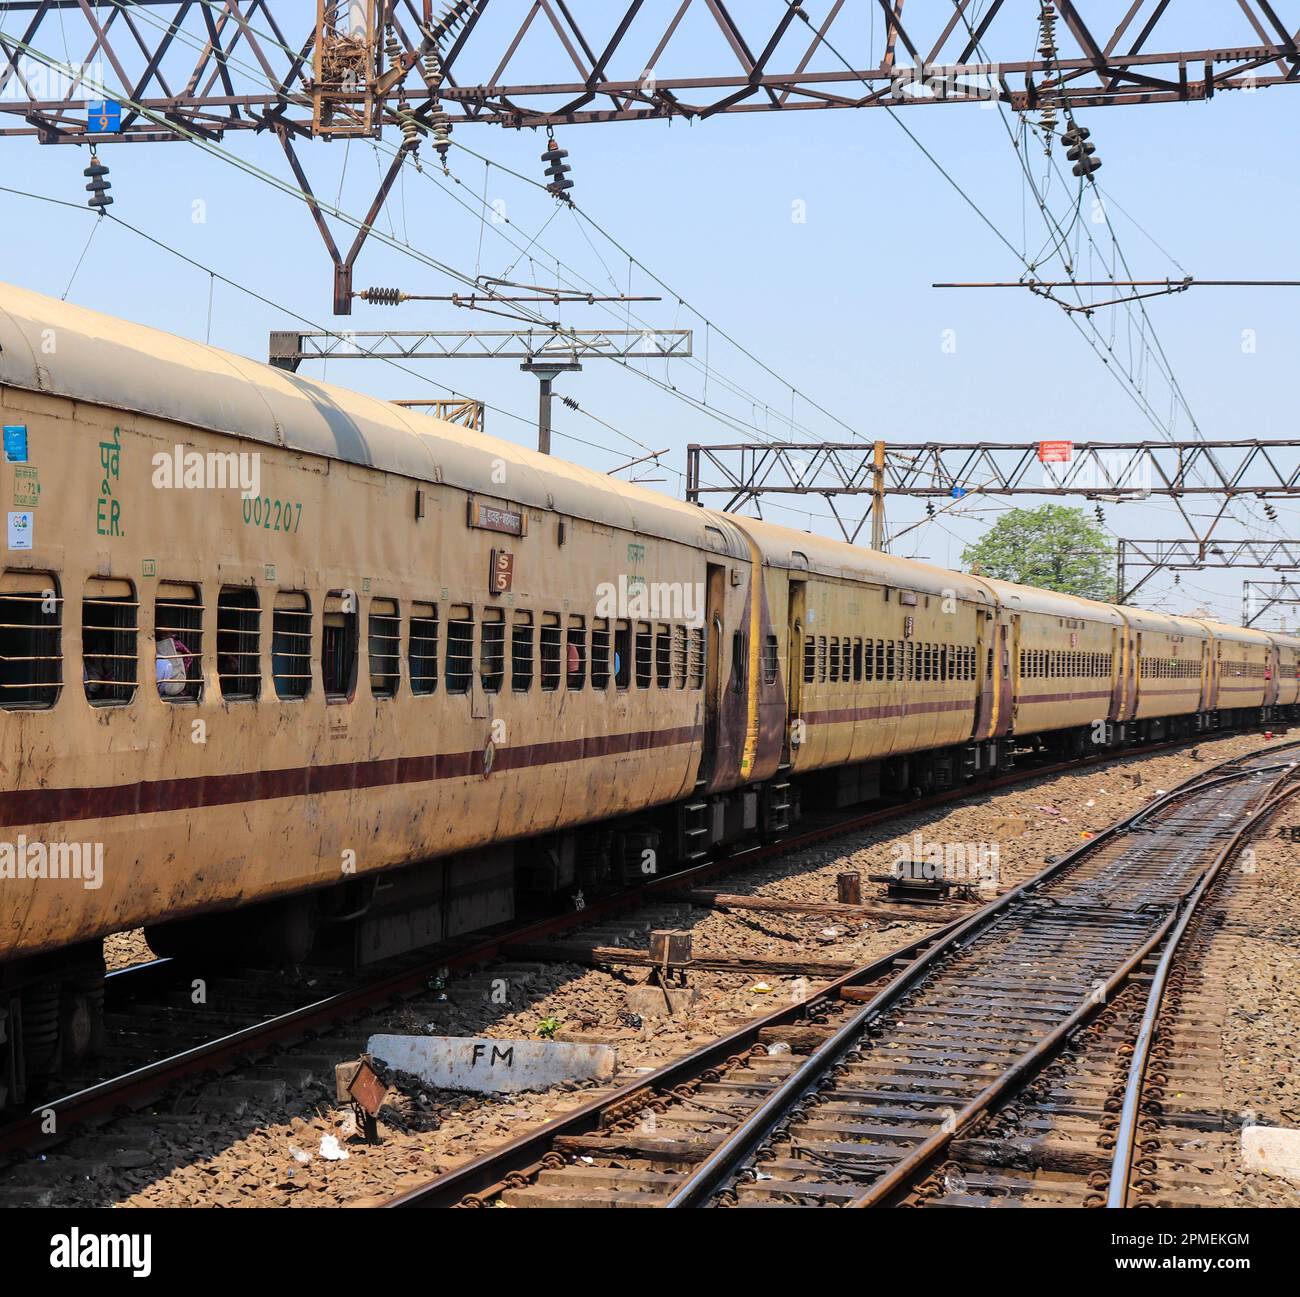 Train with rail track. Train with the rail line. Indian Railway Modern Train with Train Track and Electric Compartment. Travel Train. Stock Photo